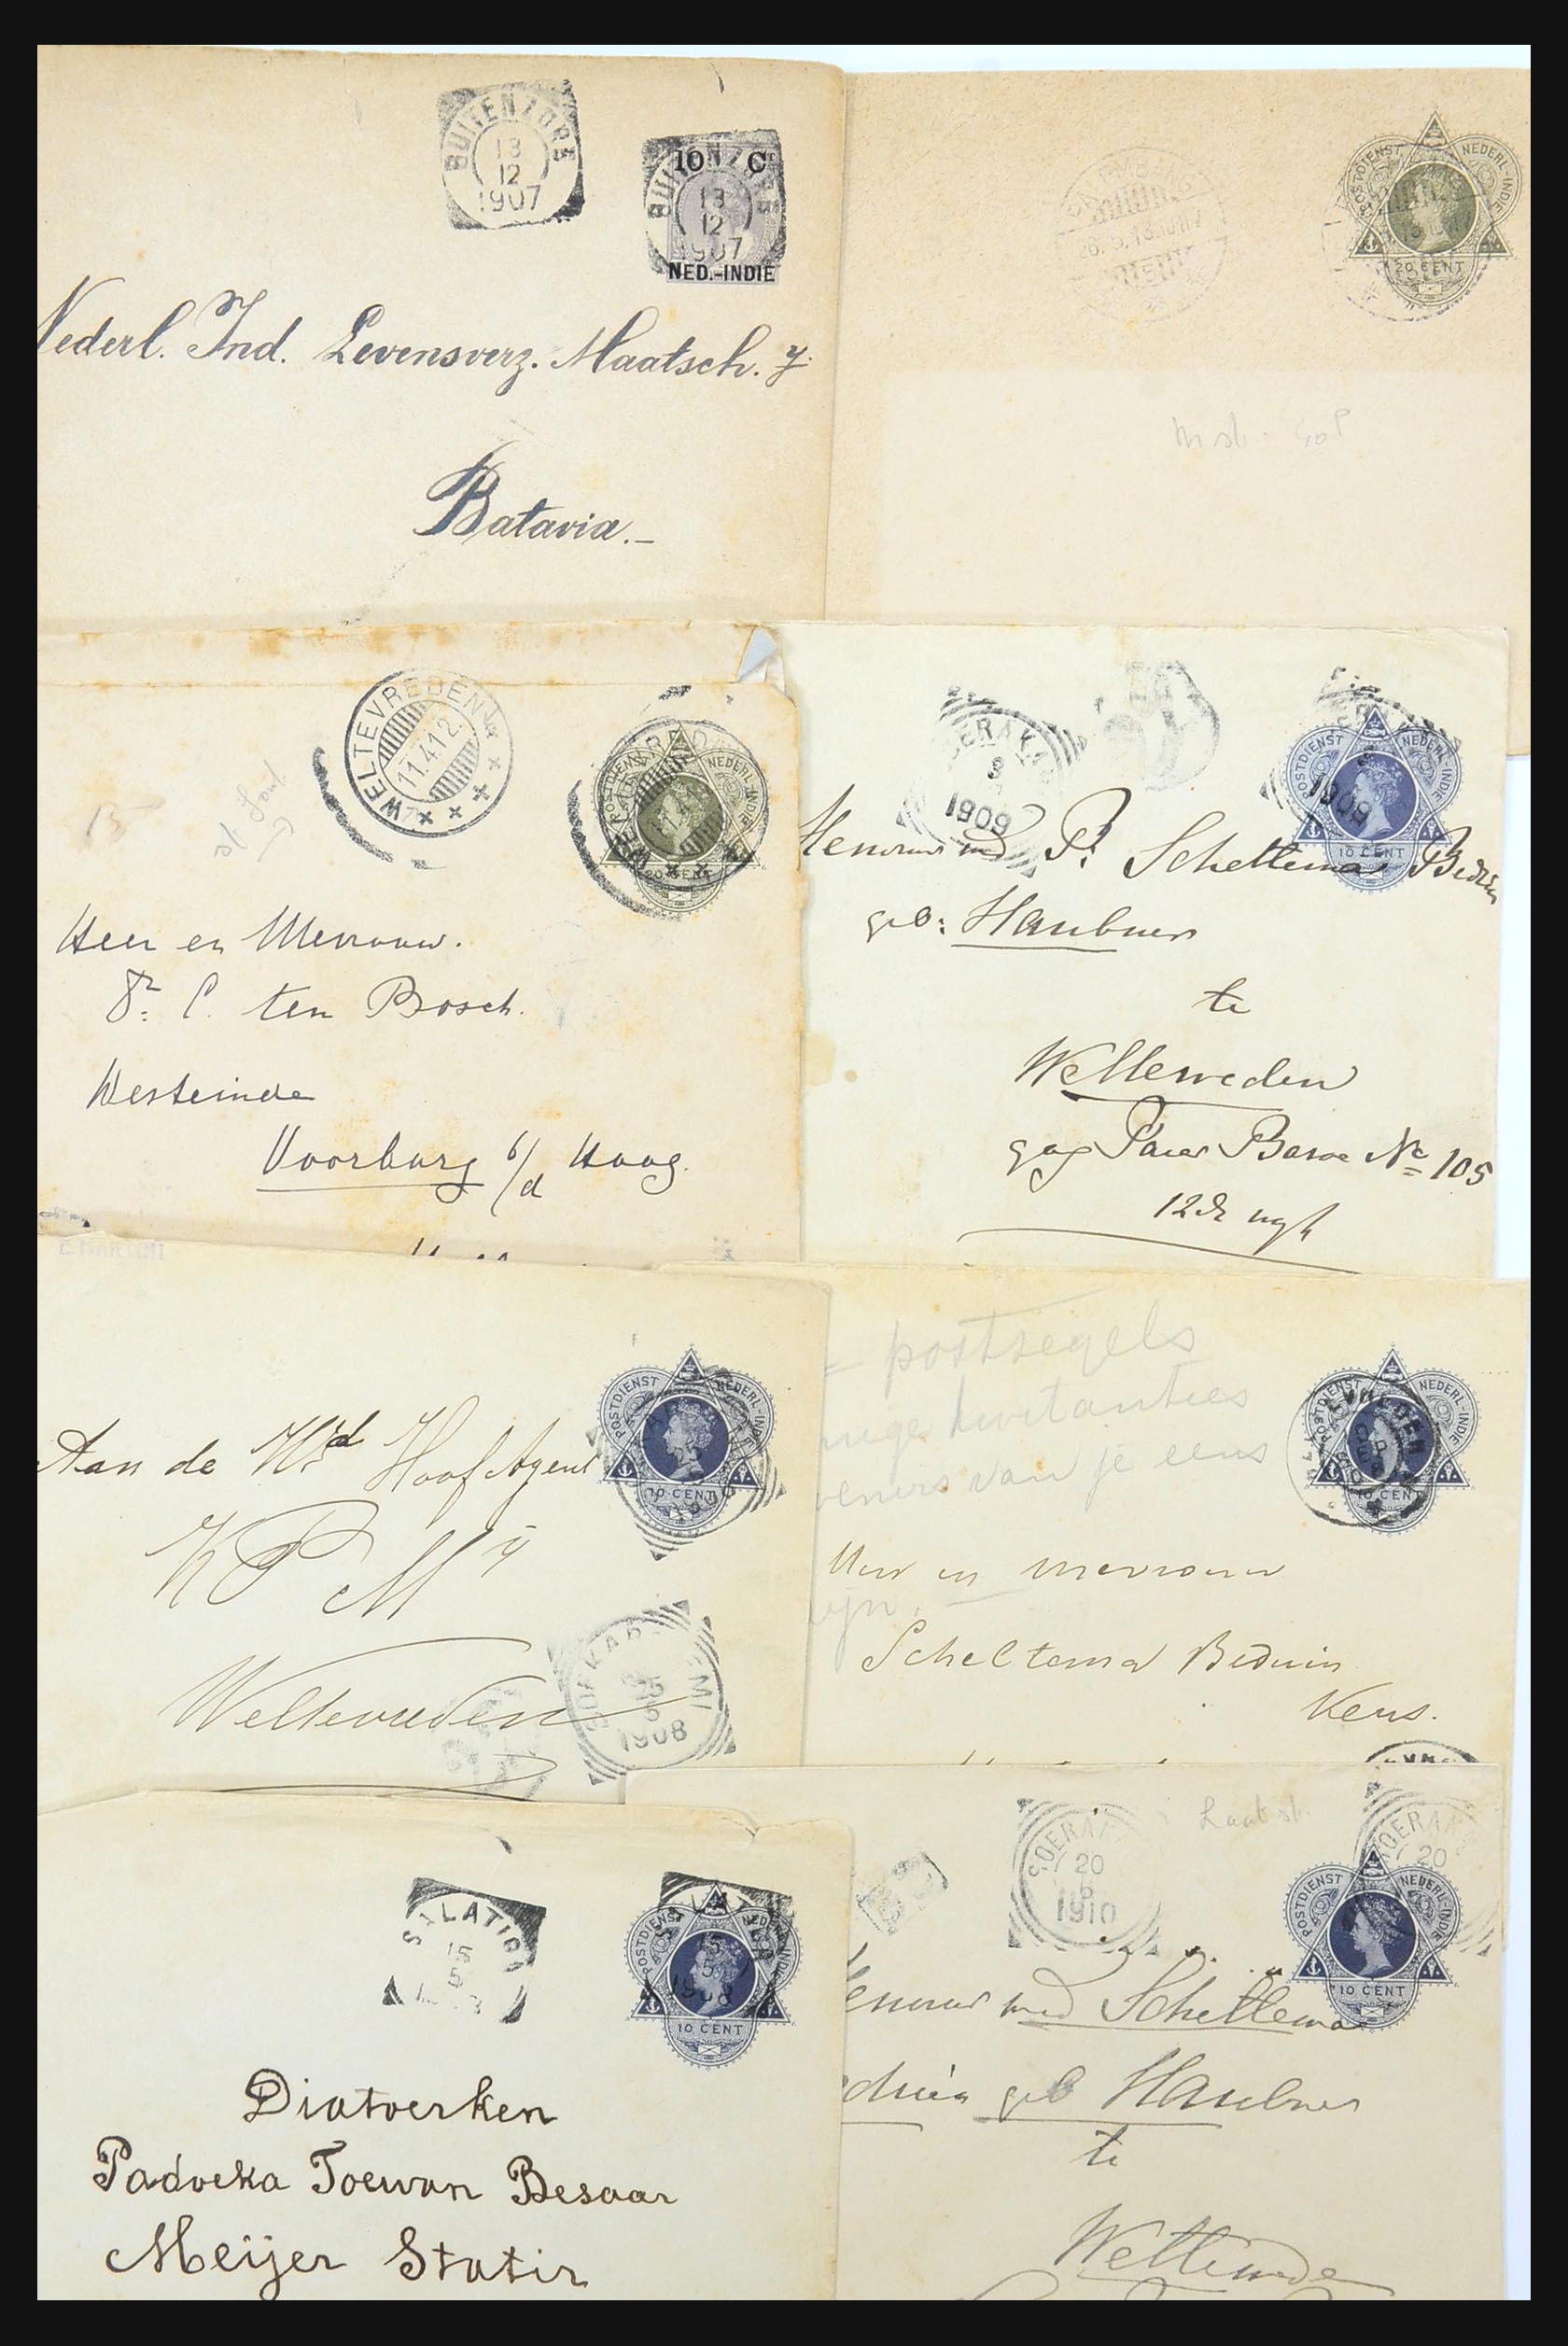 31361 061 - 31361 Netherlands Indies covers 1880-1950.